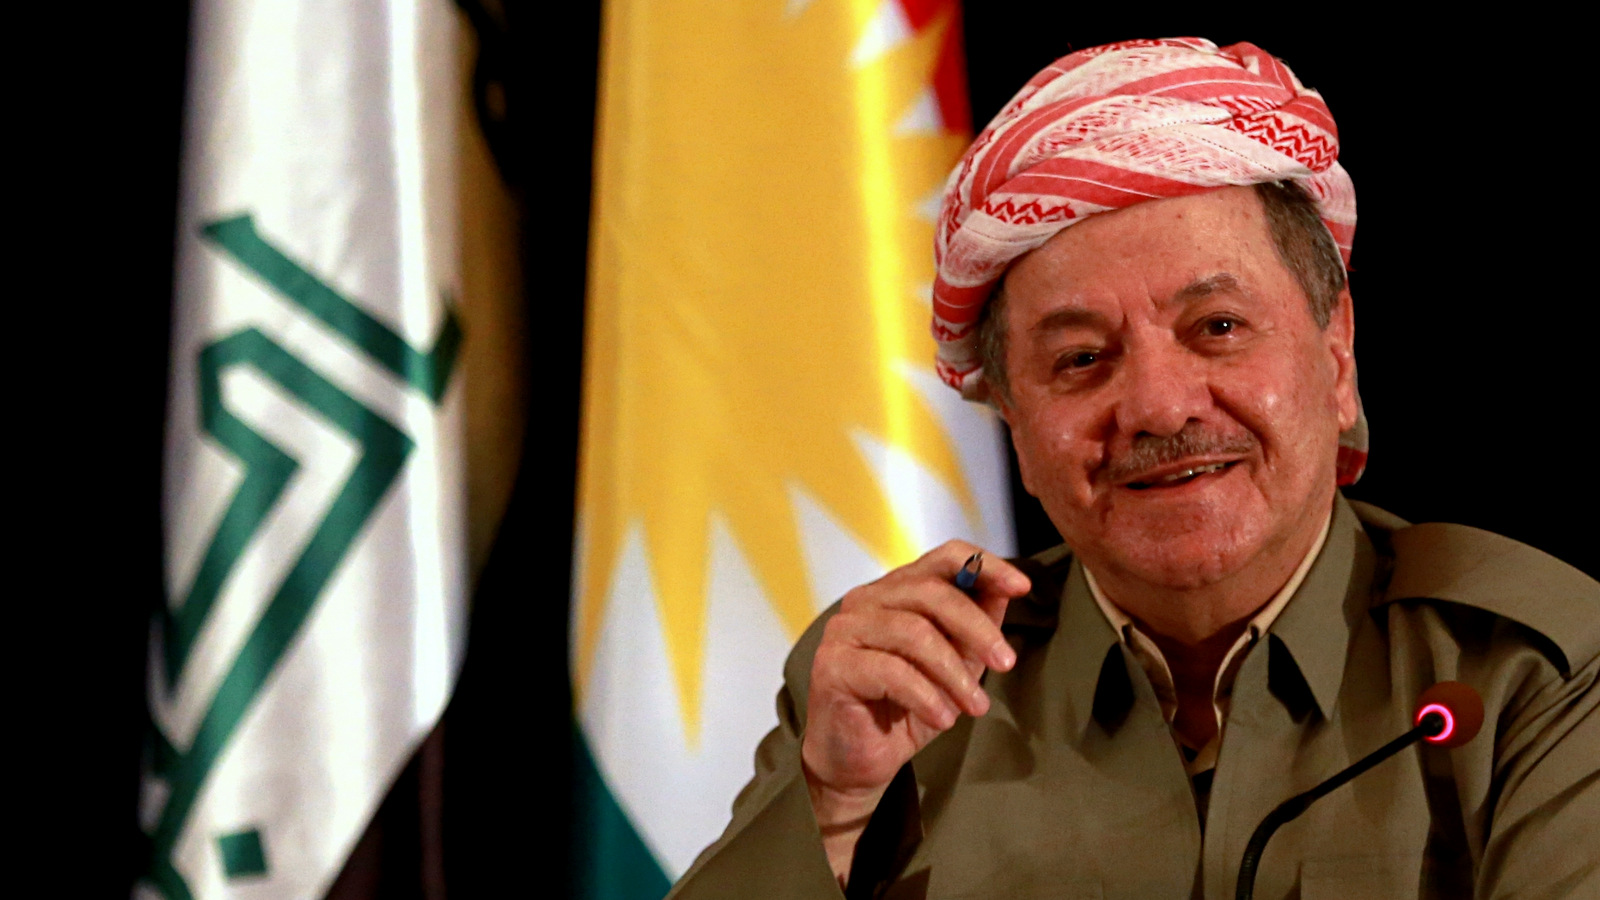 Massoud Barzani, speaks to reporters during a press conference at the Salah al-Din resort, in Irbil, Iraq, Sunday, Sept. 24, 2017. Barzani said Sunday, that the controversial vote on independence will go ahead as planned and that while the vote will be the first step in a long process to negotiate independence, the region’s “partnership” with the Iraqi central government in Baghdad is over. (AP Photo/Khalid Mohammed)